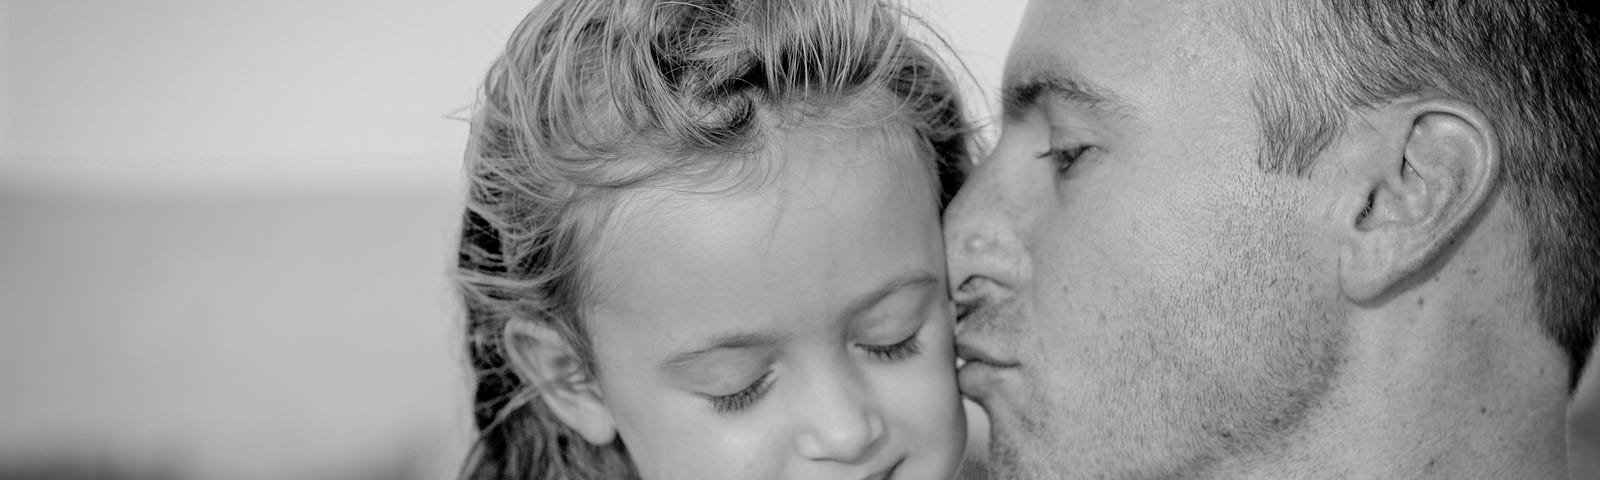 father kissing young daughter on her cheek